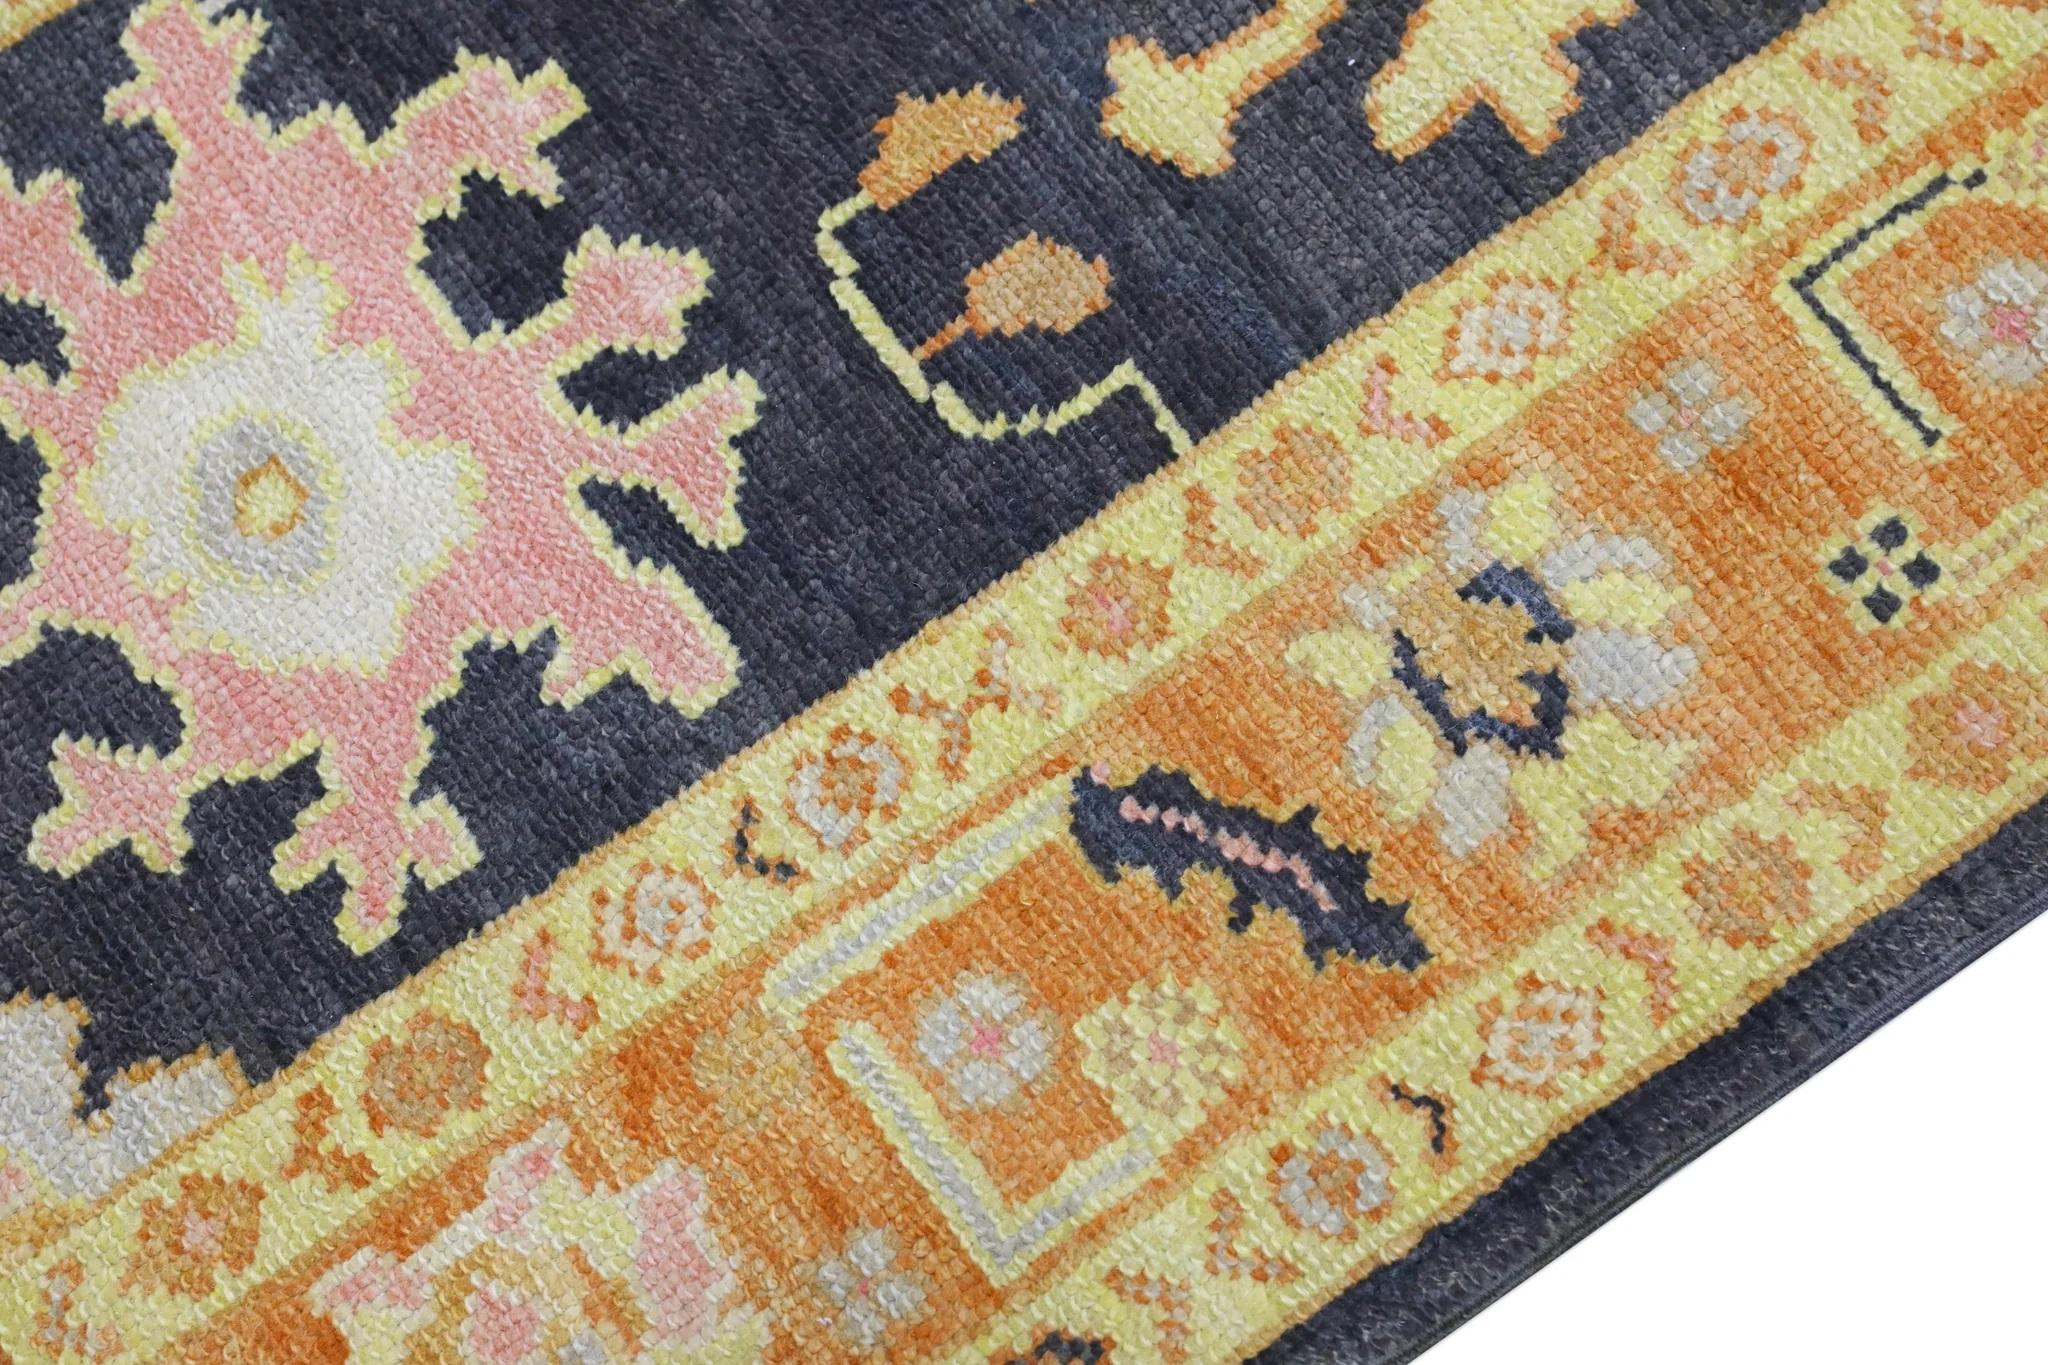 Vegetable Dyed Handwoven Turkish Oushak Rug with Orange and Pink Floral Design 3'1